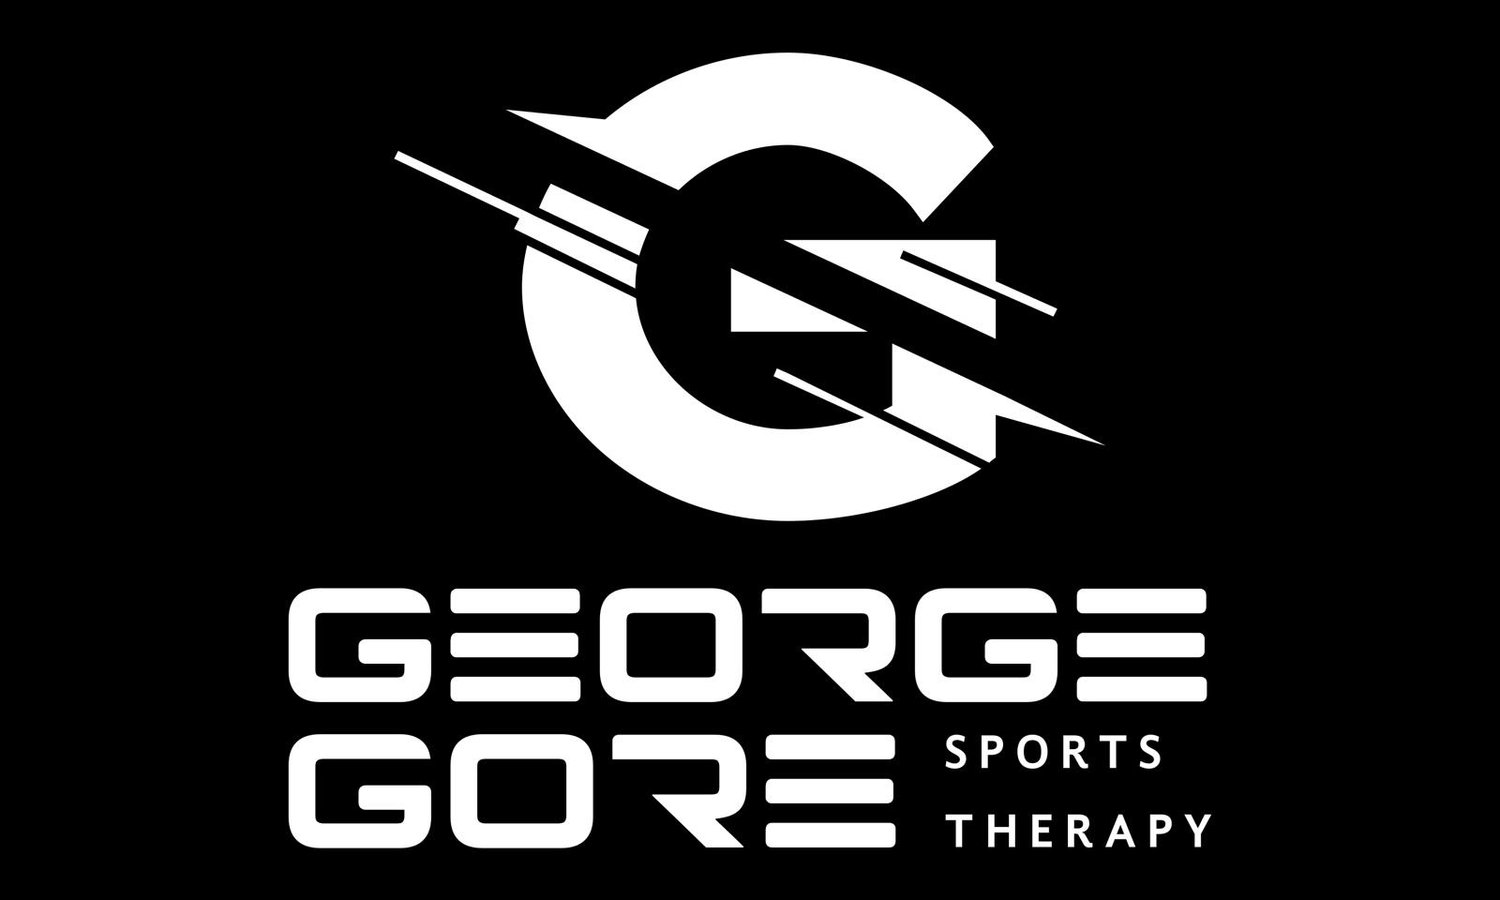 George Gore Sports Therapy